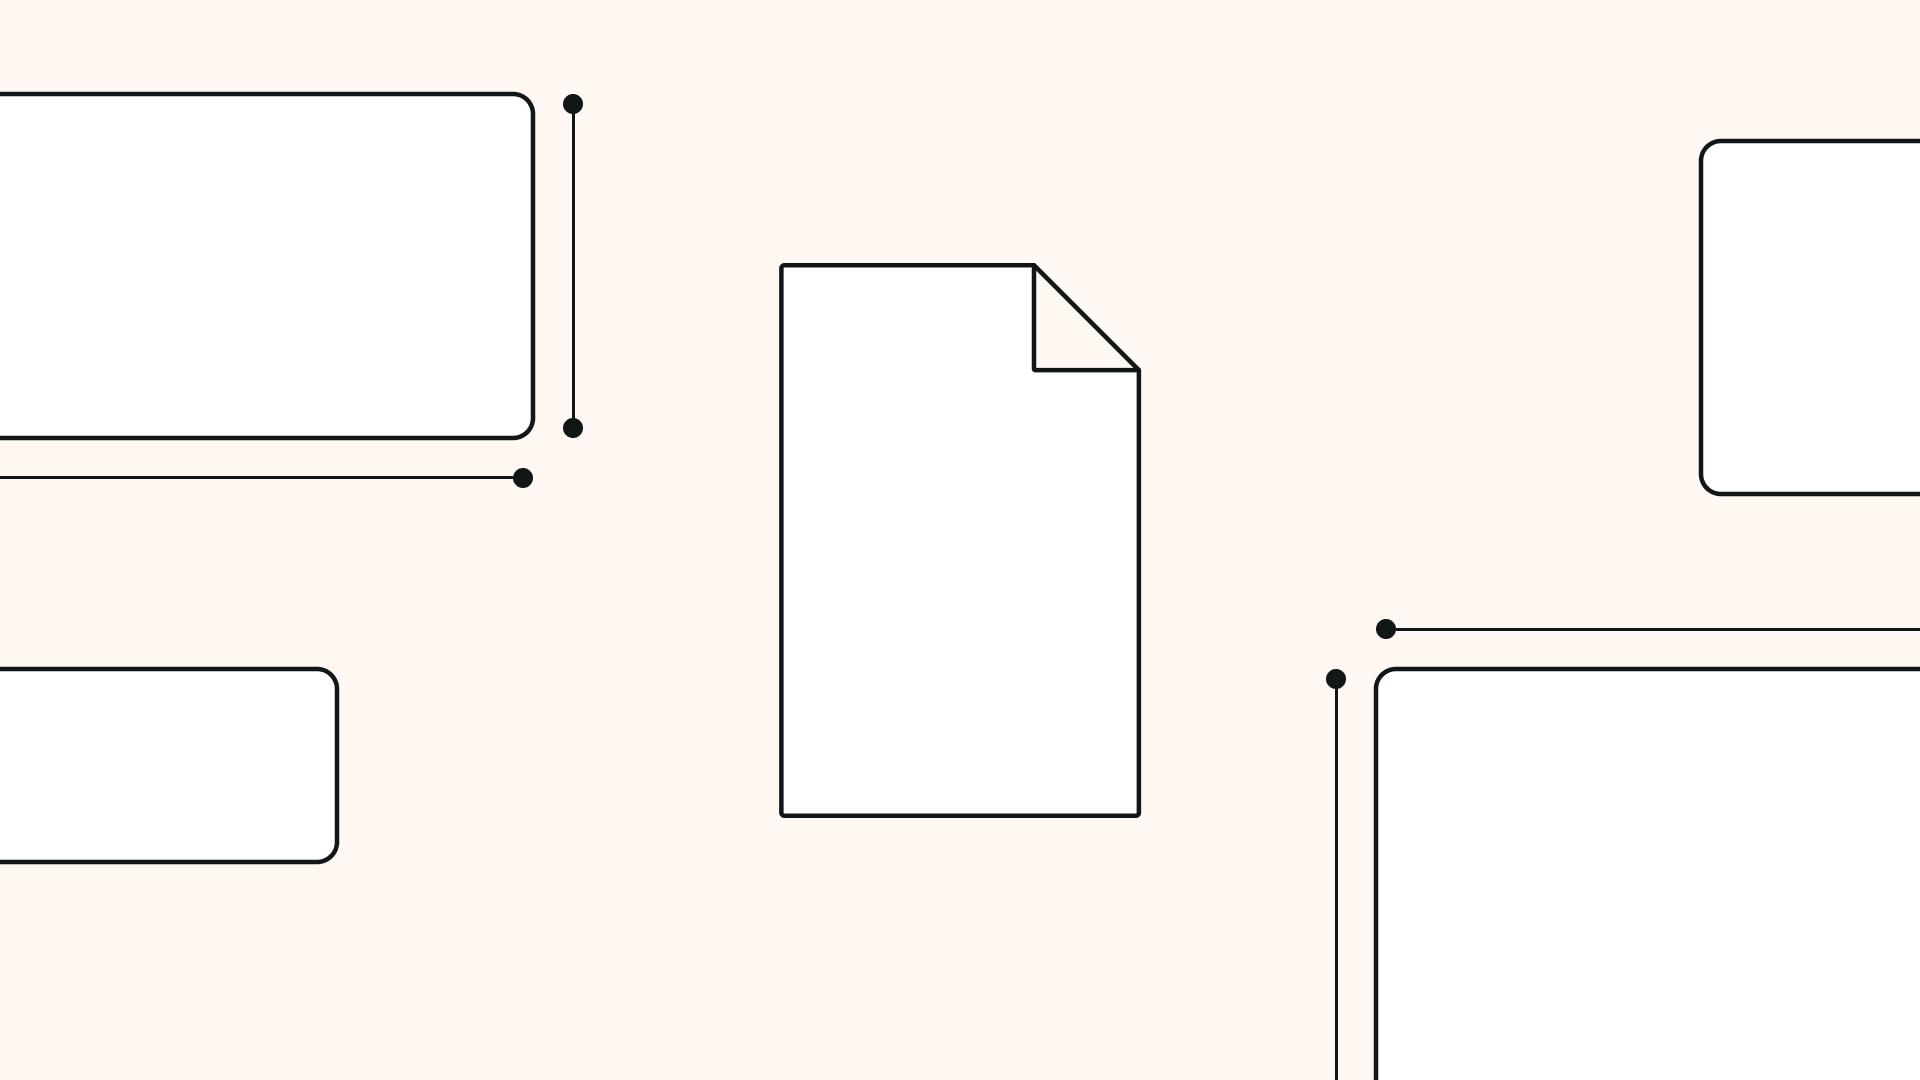 Minimalist design of rectangles and a document icon on a light background